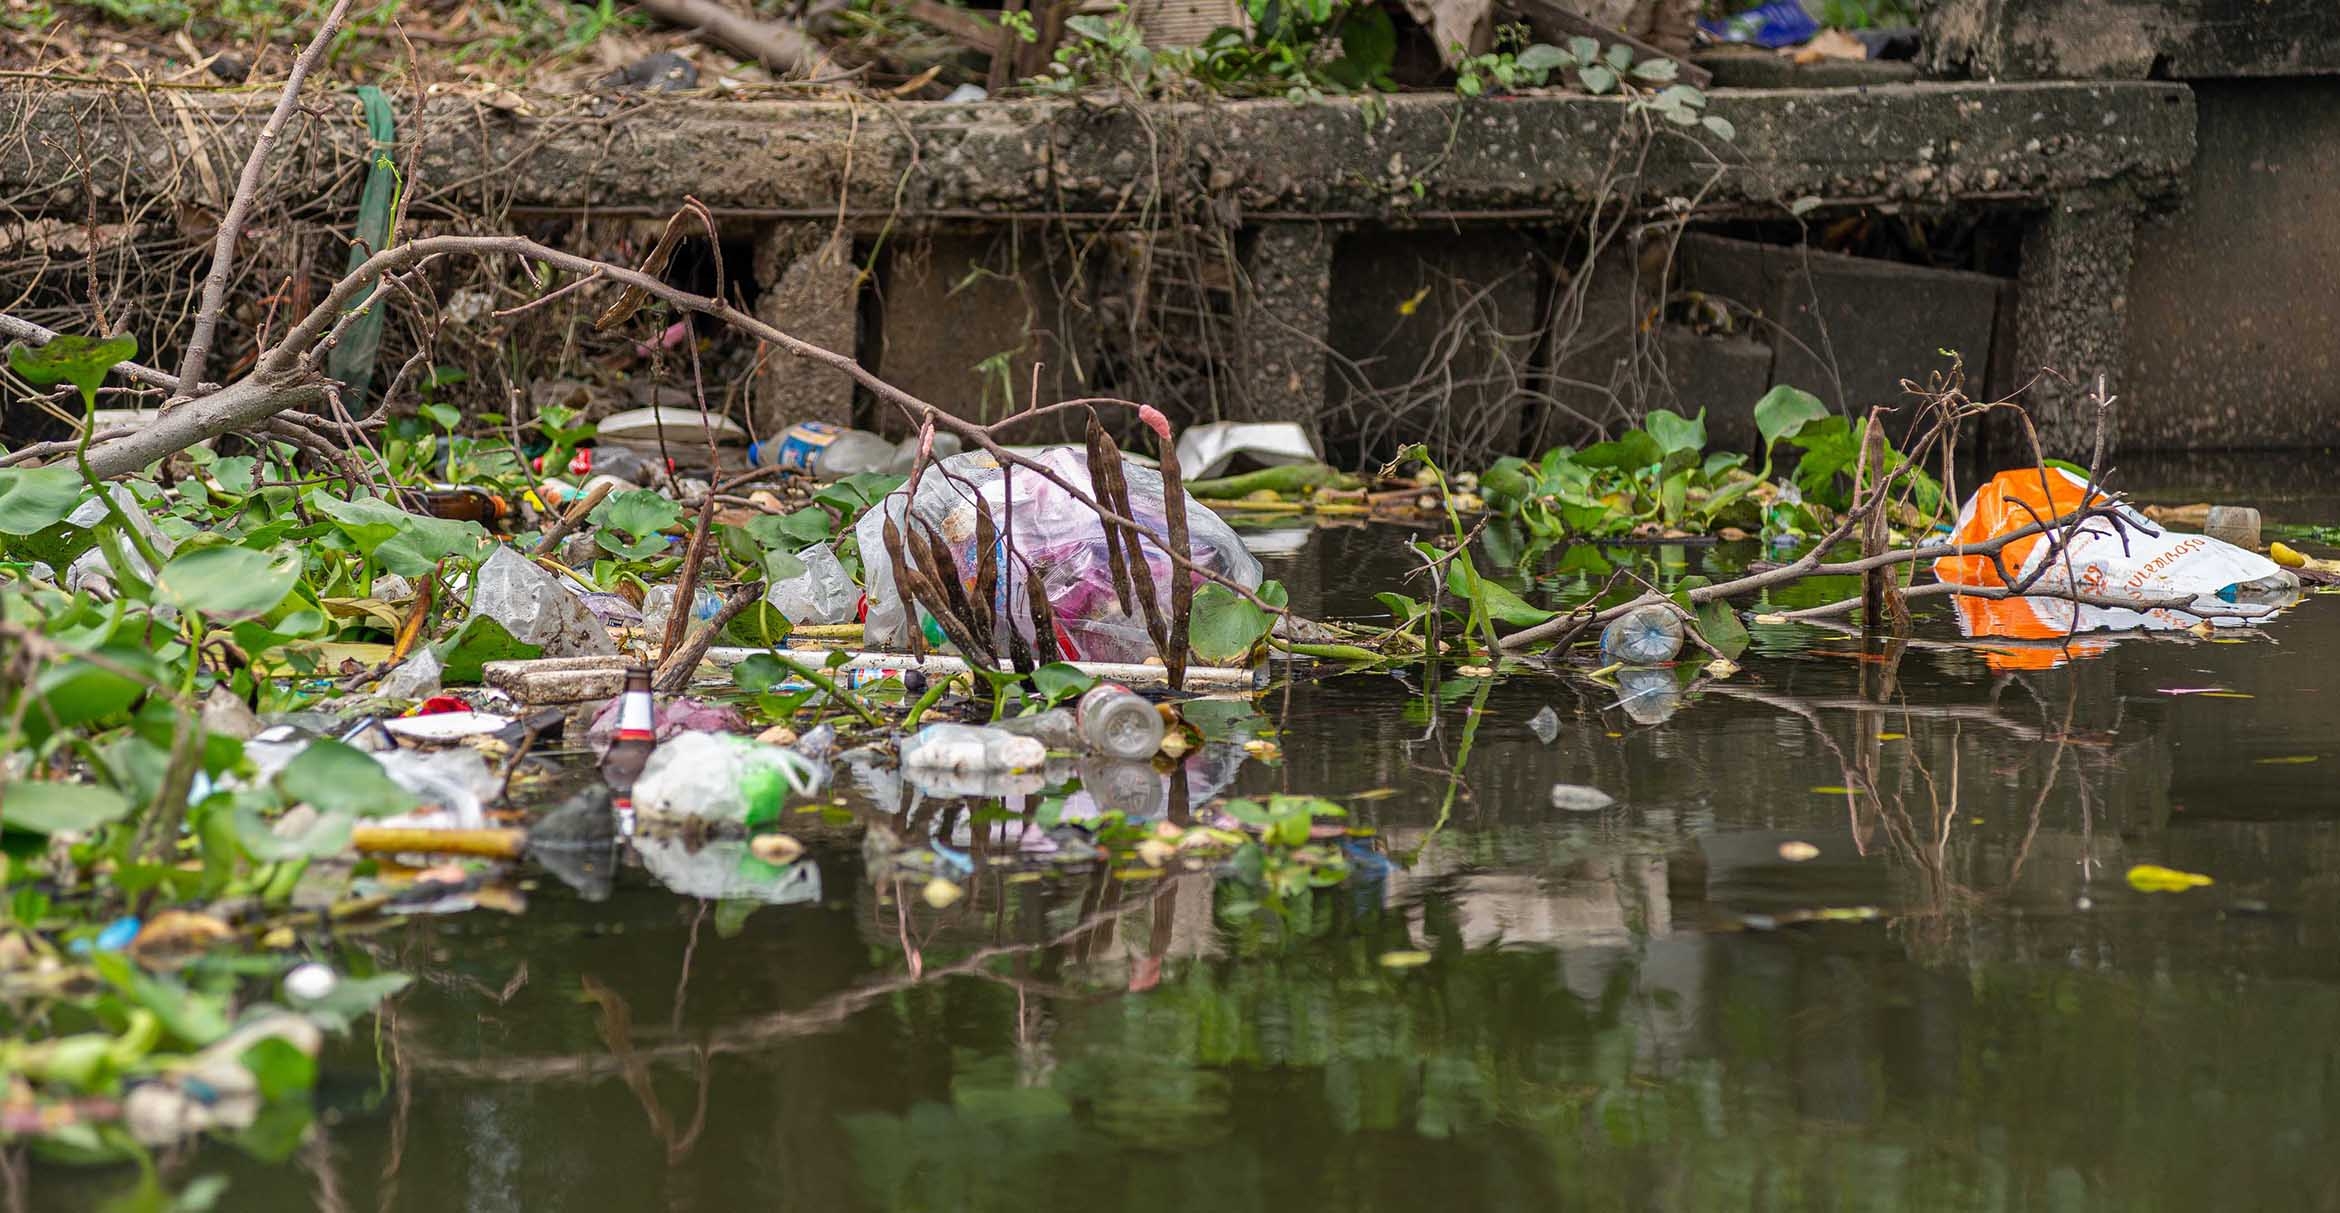 Plastic bags and bottles float on the surface of a river, caught in aquatic vegetation